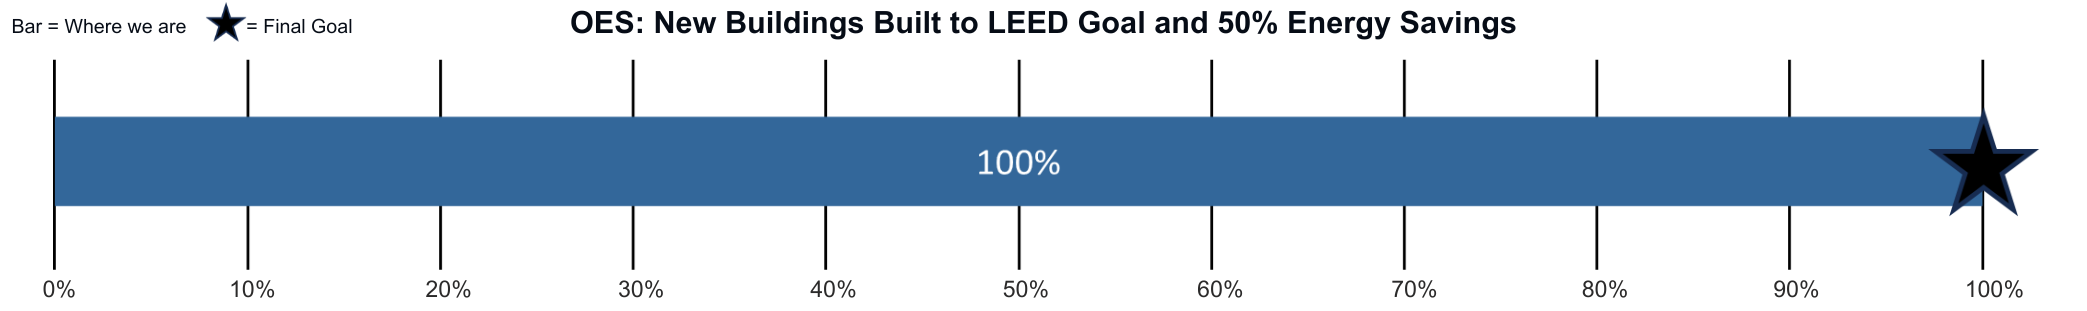 OES_ All new eligible buildings will have a commitment to green building showing 100% progress